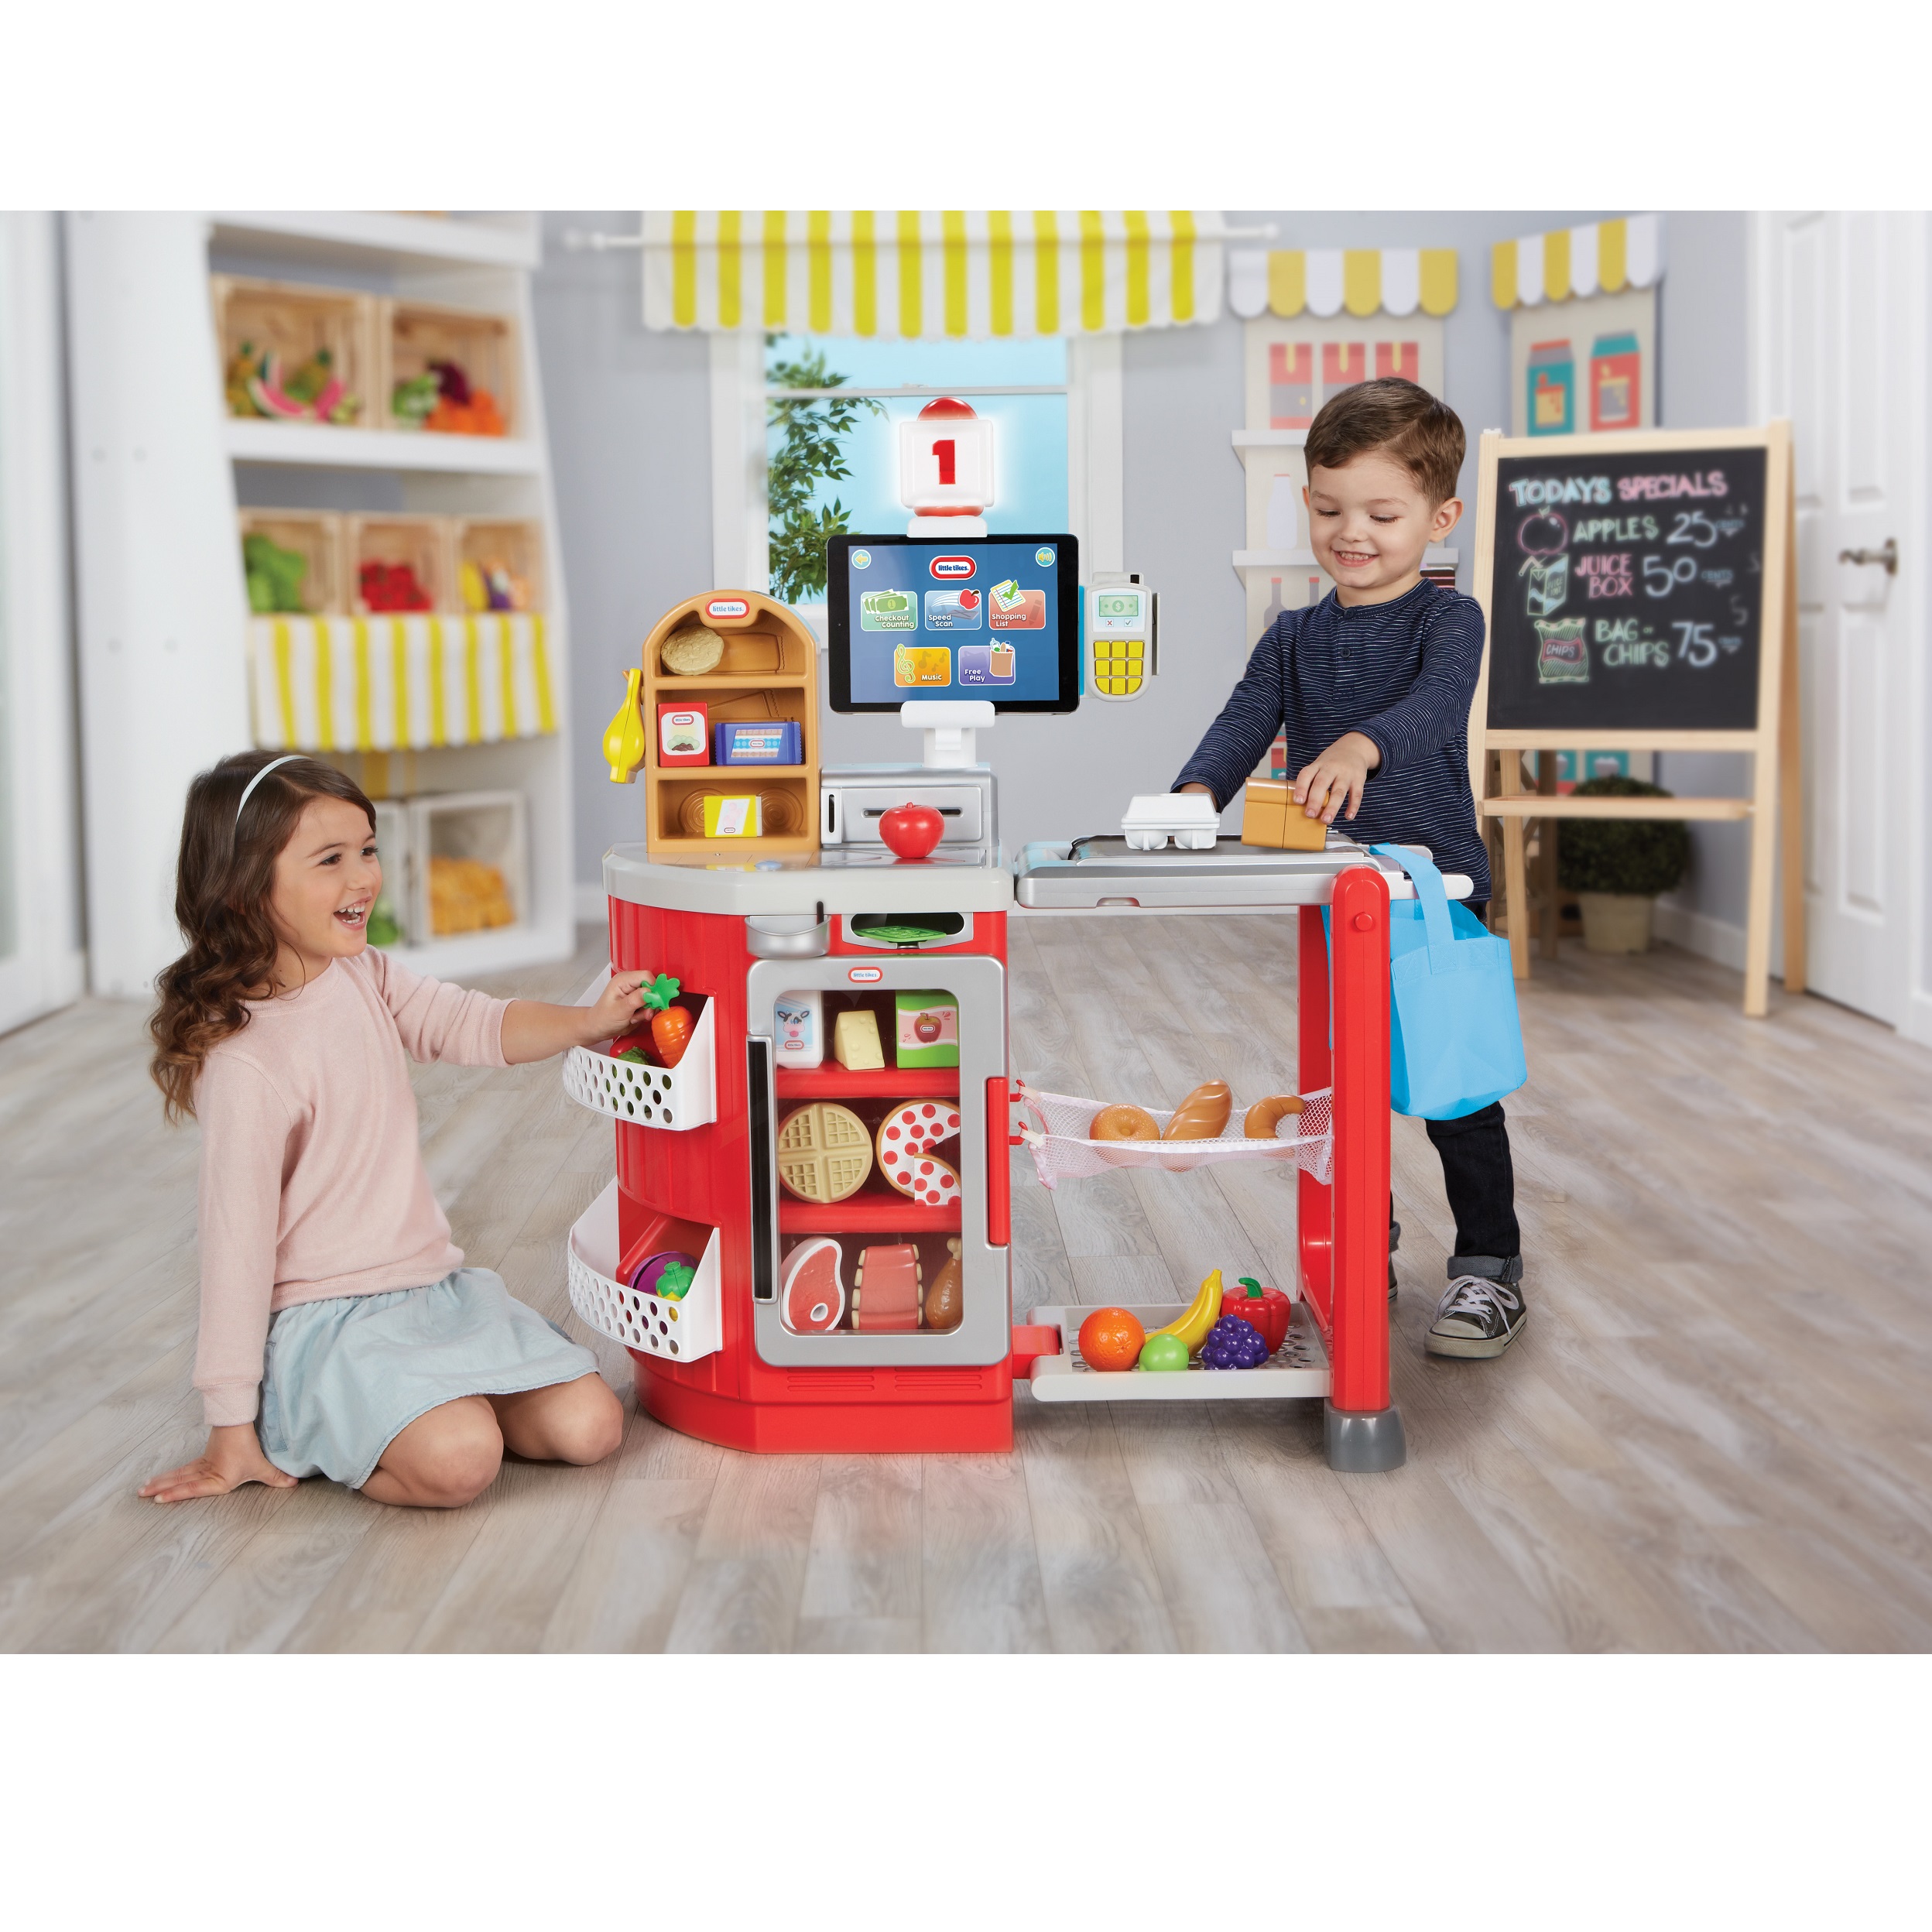 Little Tikes Shop 'n Learn Smart Checkout Role Play Toy - image 4 of 6